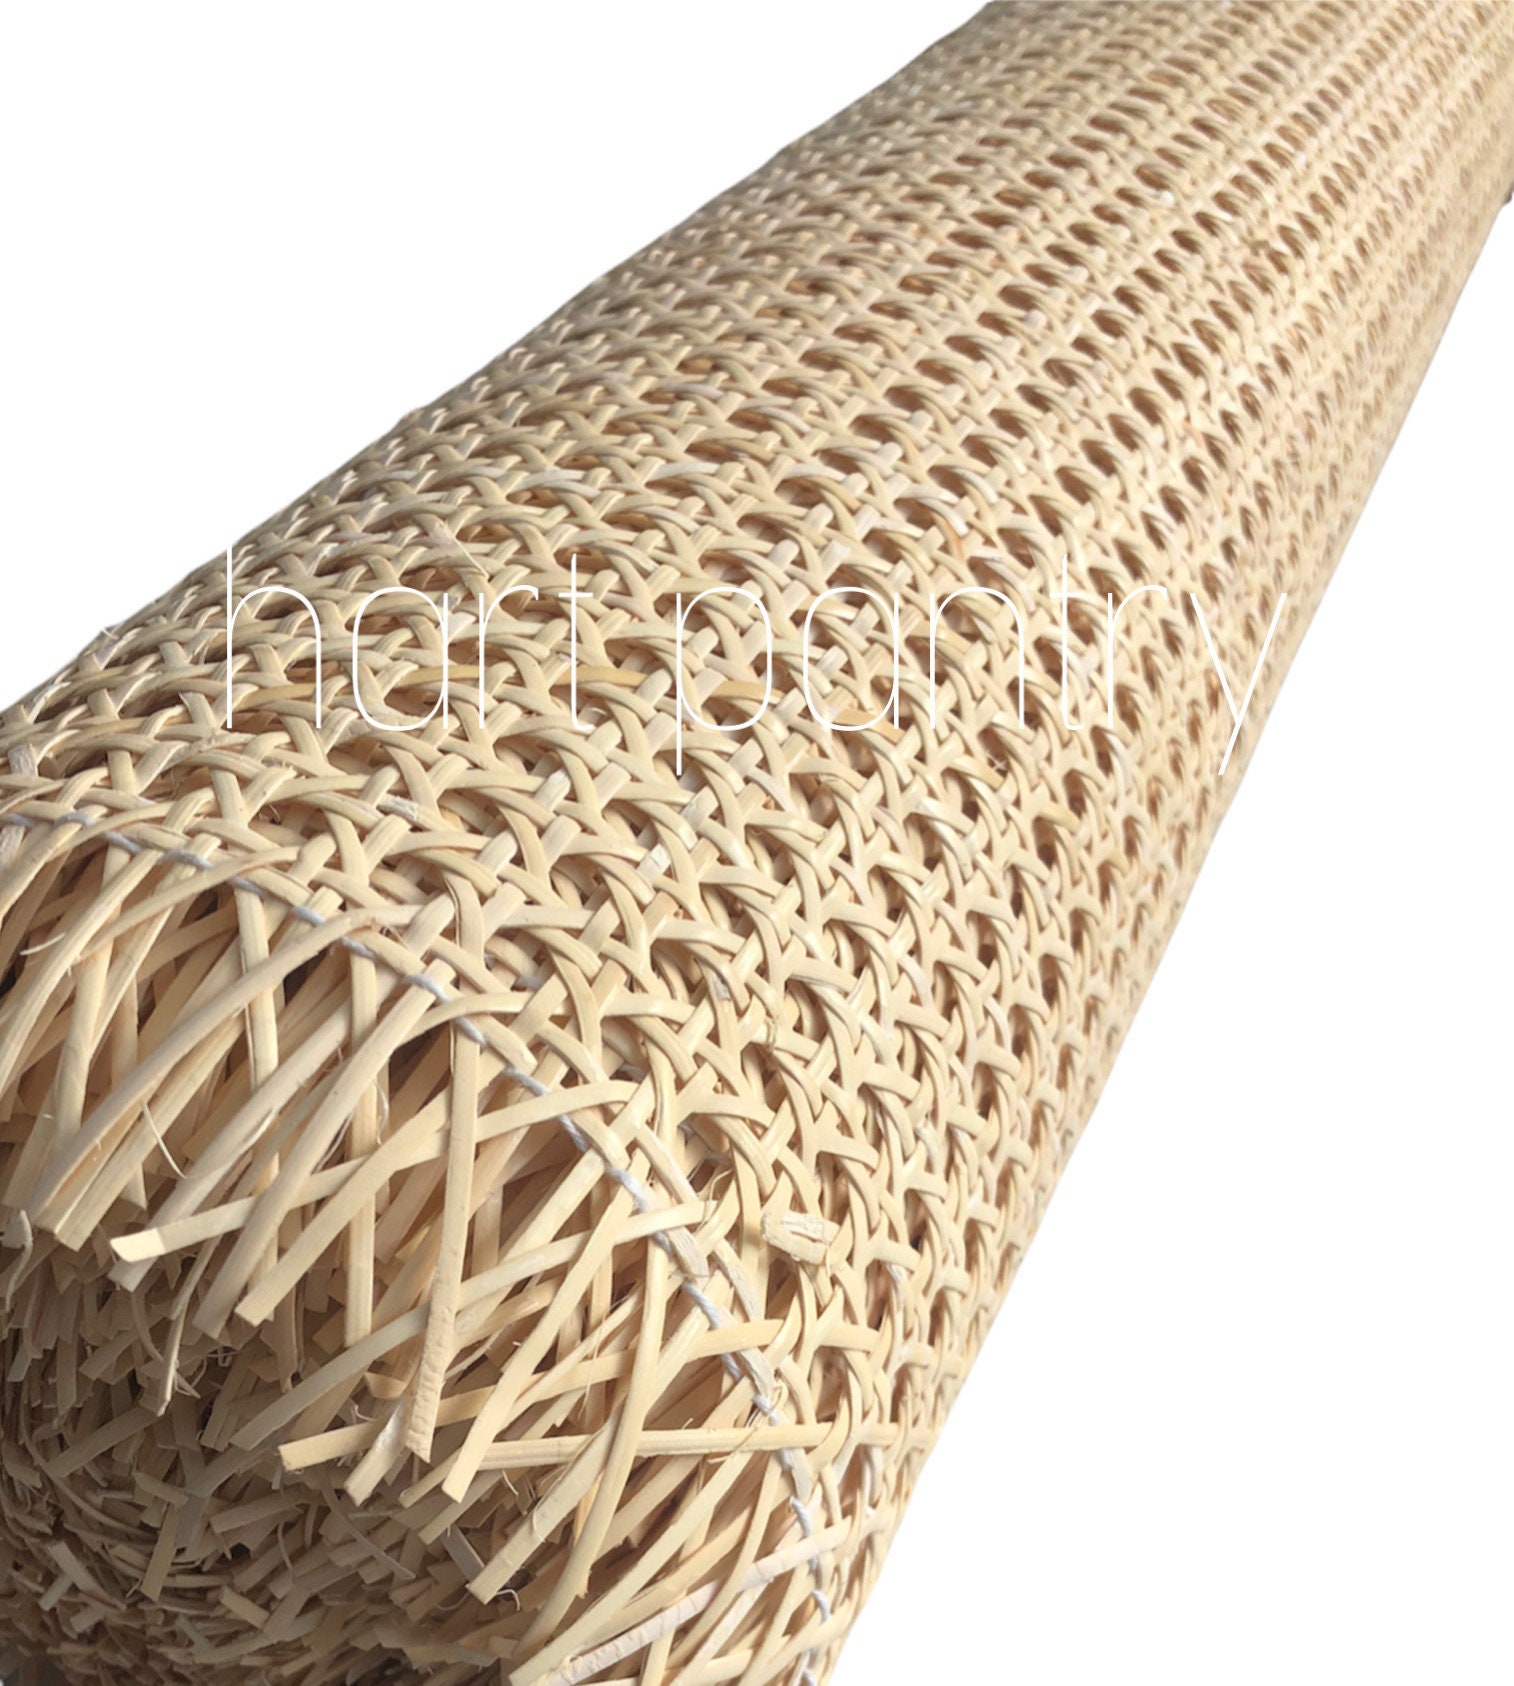 Discount Trends 24” Wide Natural Rattan Webbing Roll for Caning Projects - Woven Open Mesh for Caning Chair - Rattan Hexagon Cane Webbing - 24 x 24